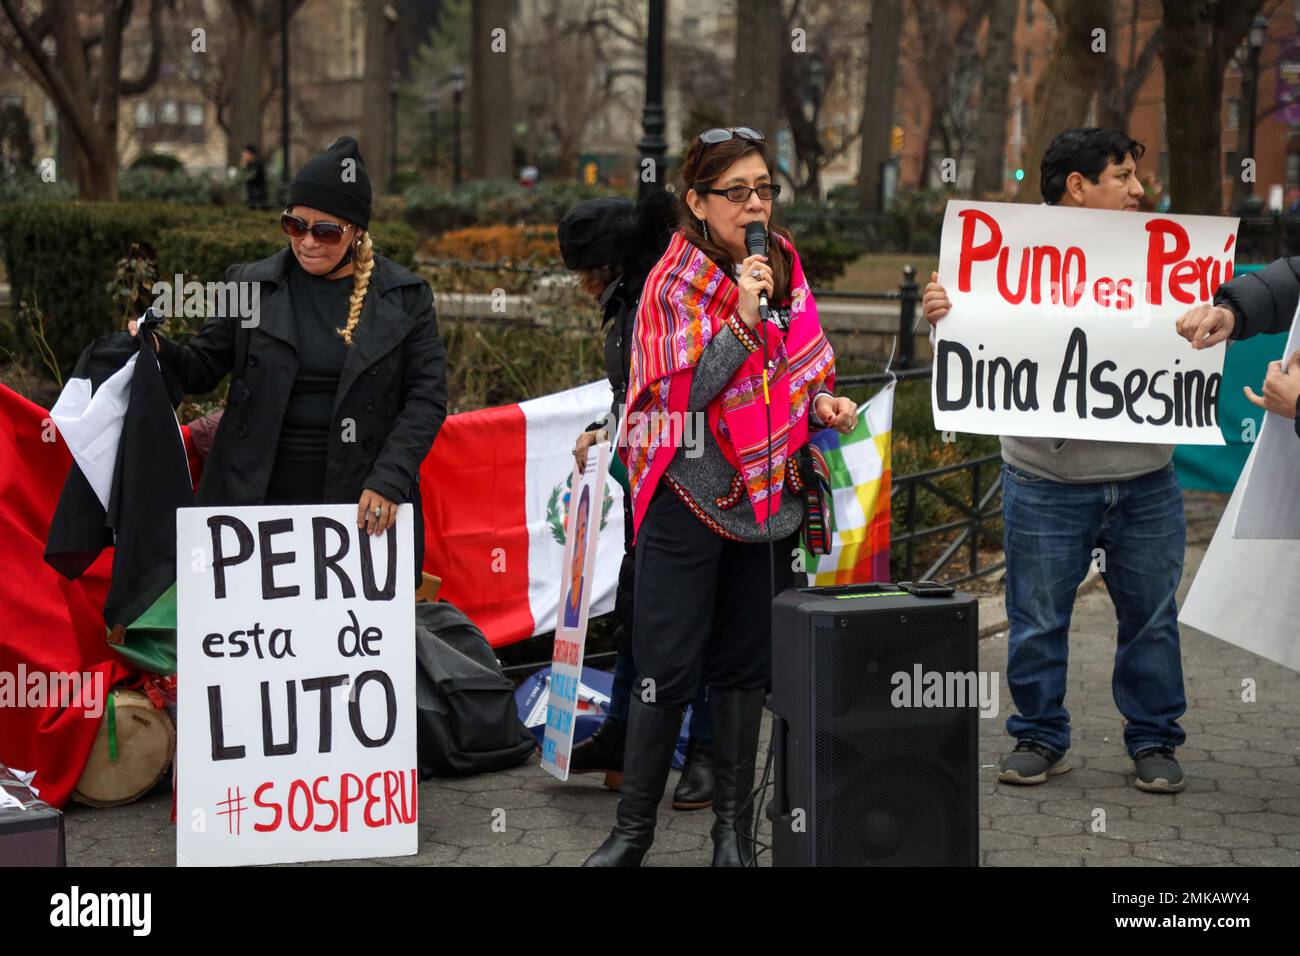 Protesters during an act against violence in the protests in Peru in recent days, in Union Square on the island of Manhattan in New York in the United States this Saturday, 28. Credit: Brazil Photo Press/Alamy Live News Stock Photo